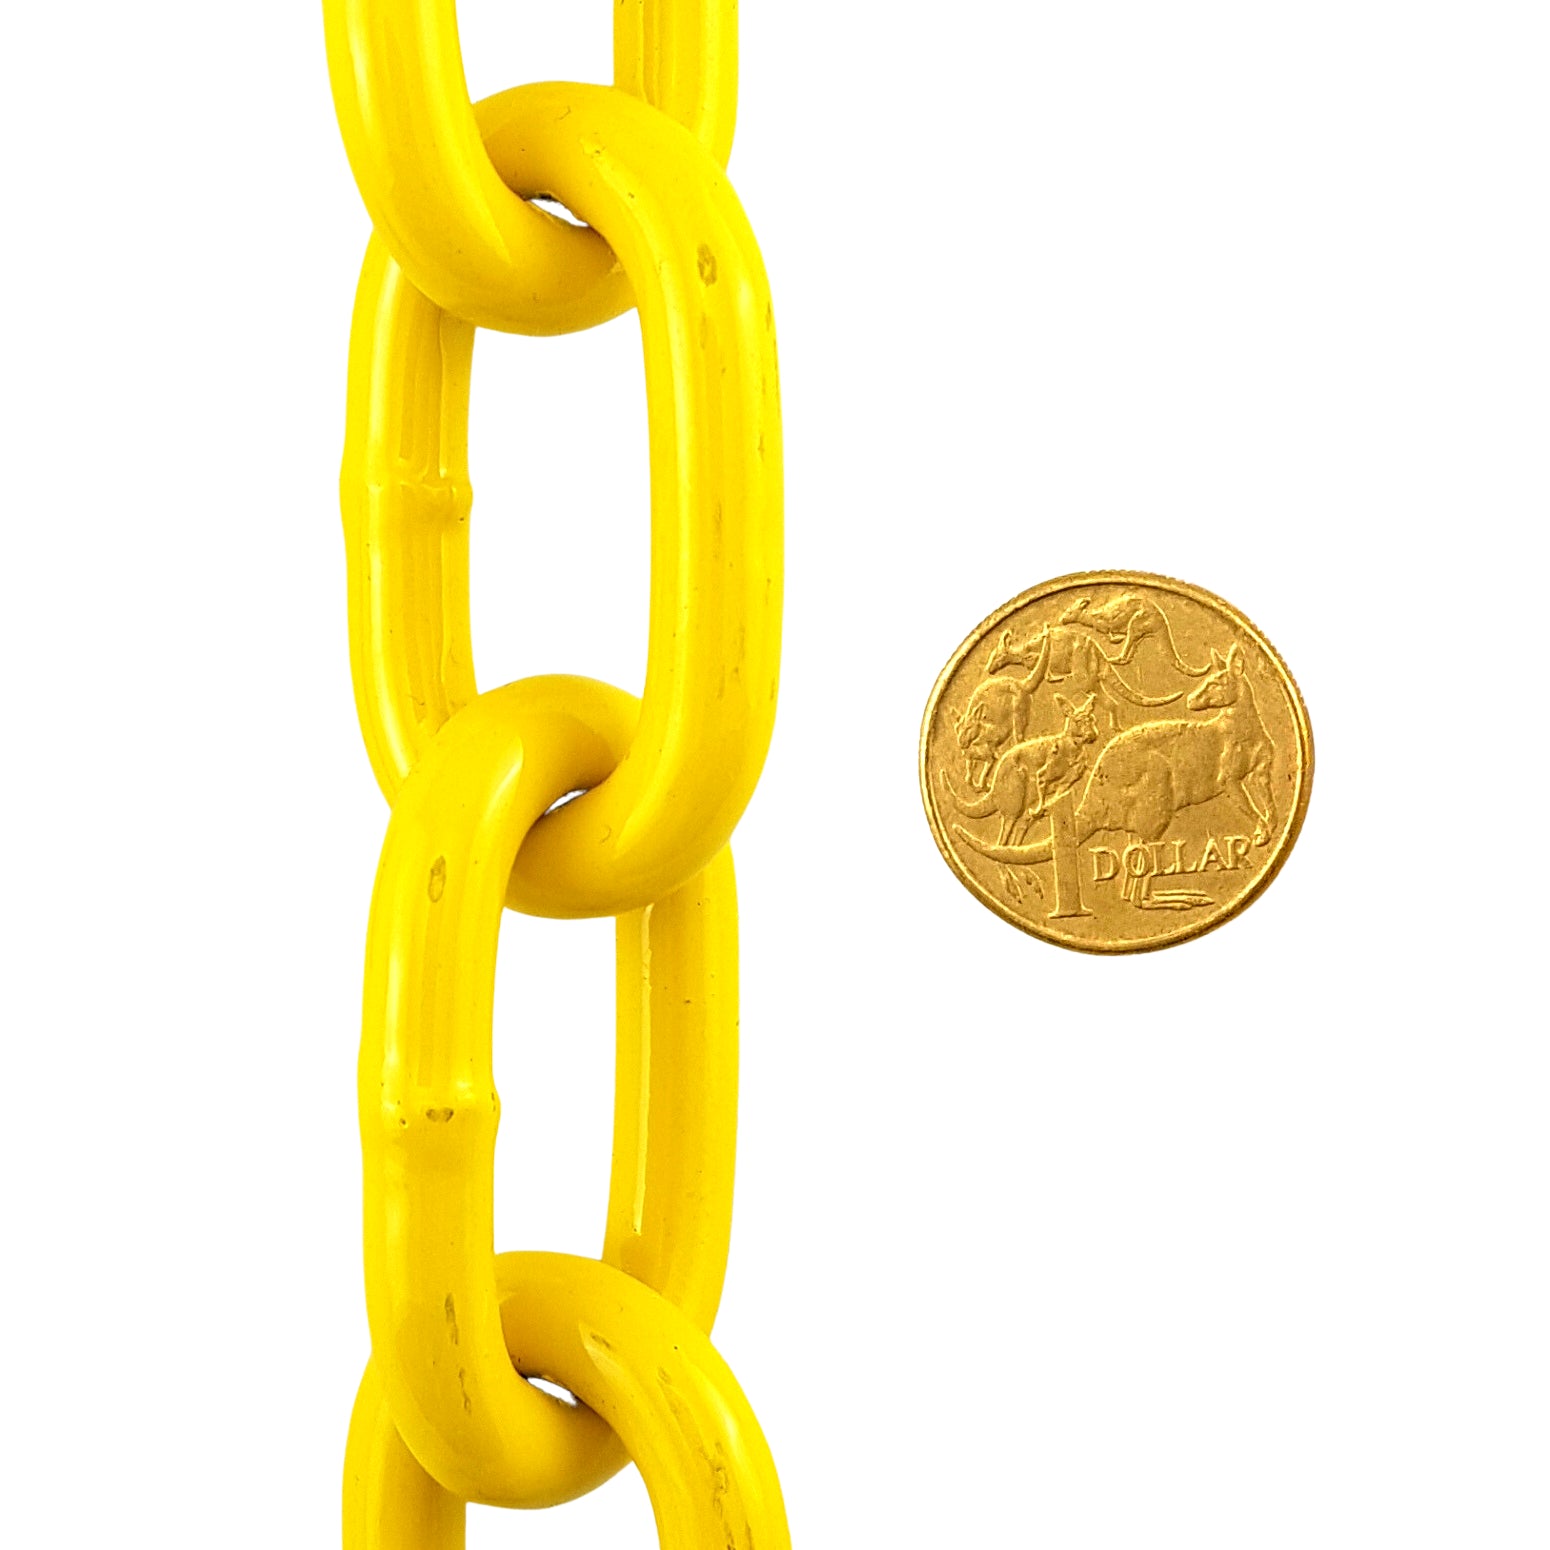 8mm Welded Steel Chain Yellow Powder Coated. By the metre. Australia wide delivery.